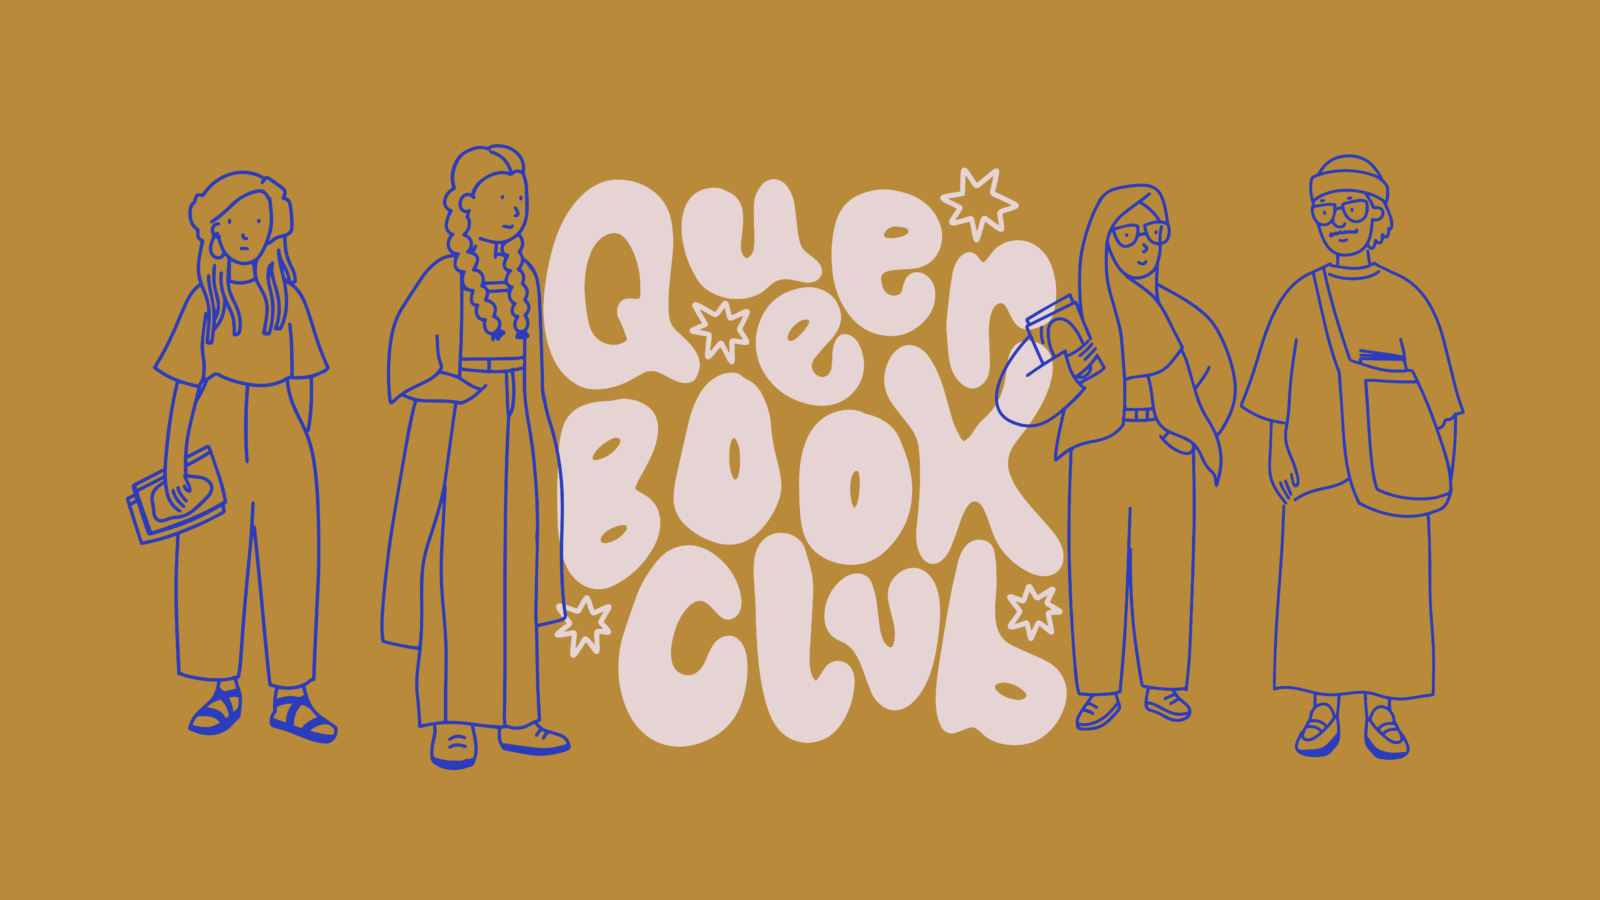 Ochre background with blue illustrations of people, some are holding books, in front of a handwritten title reading 'Queer Book Club' in white.